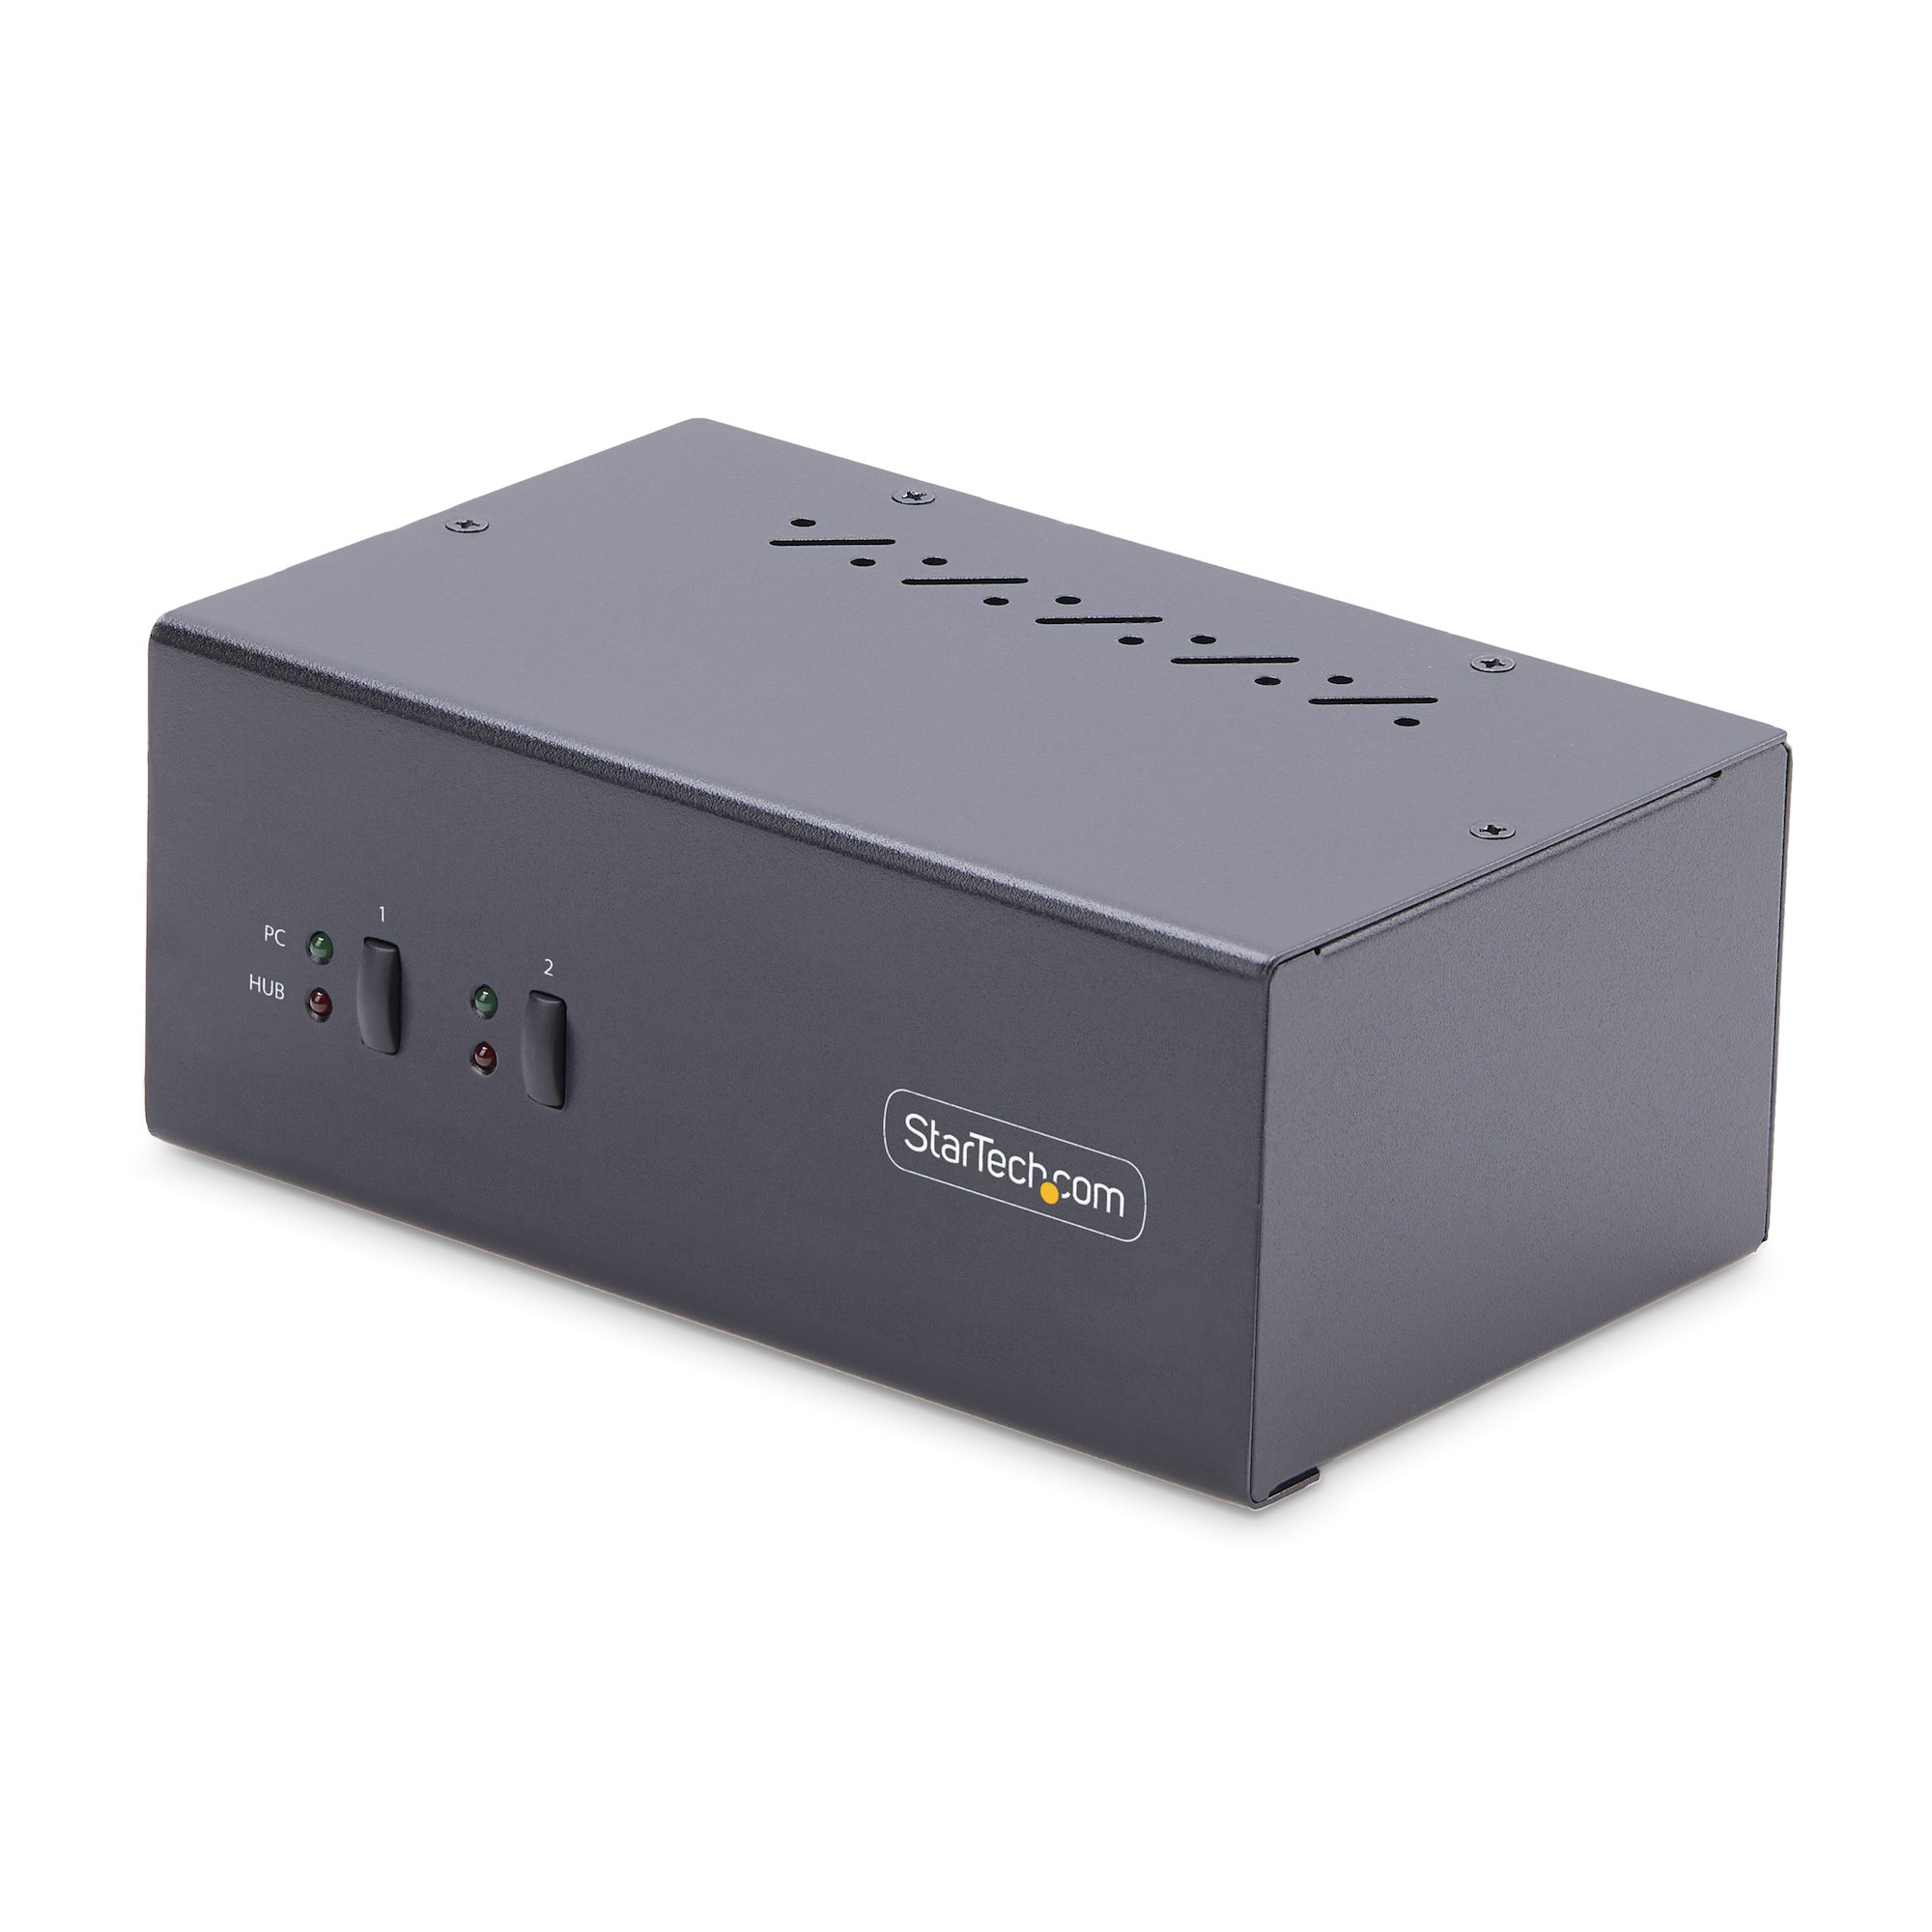 2-Port USB-C Gen 2 Sharing Switch with Power Pass-through - US3342, ATEN  Docks and Switches